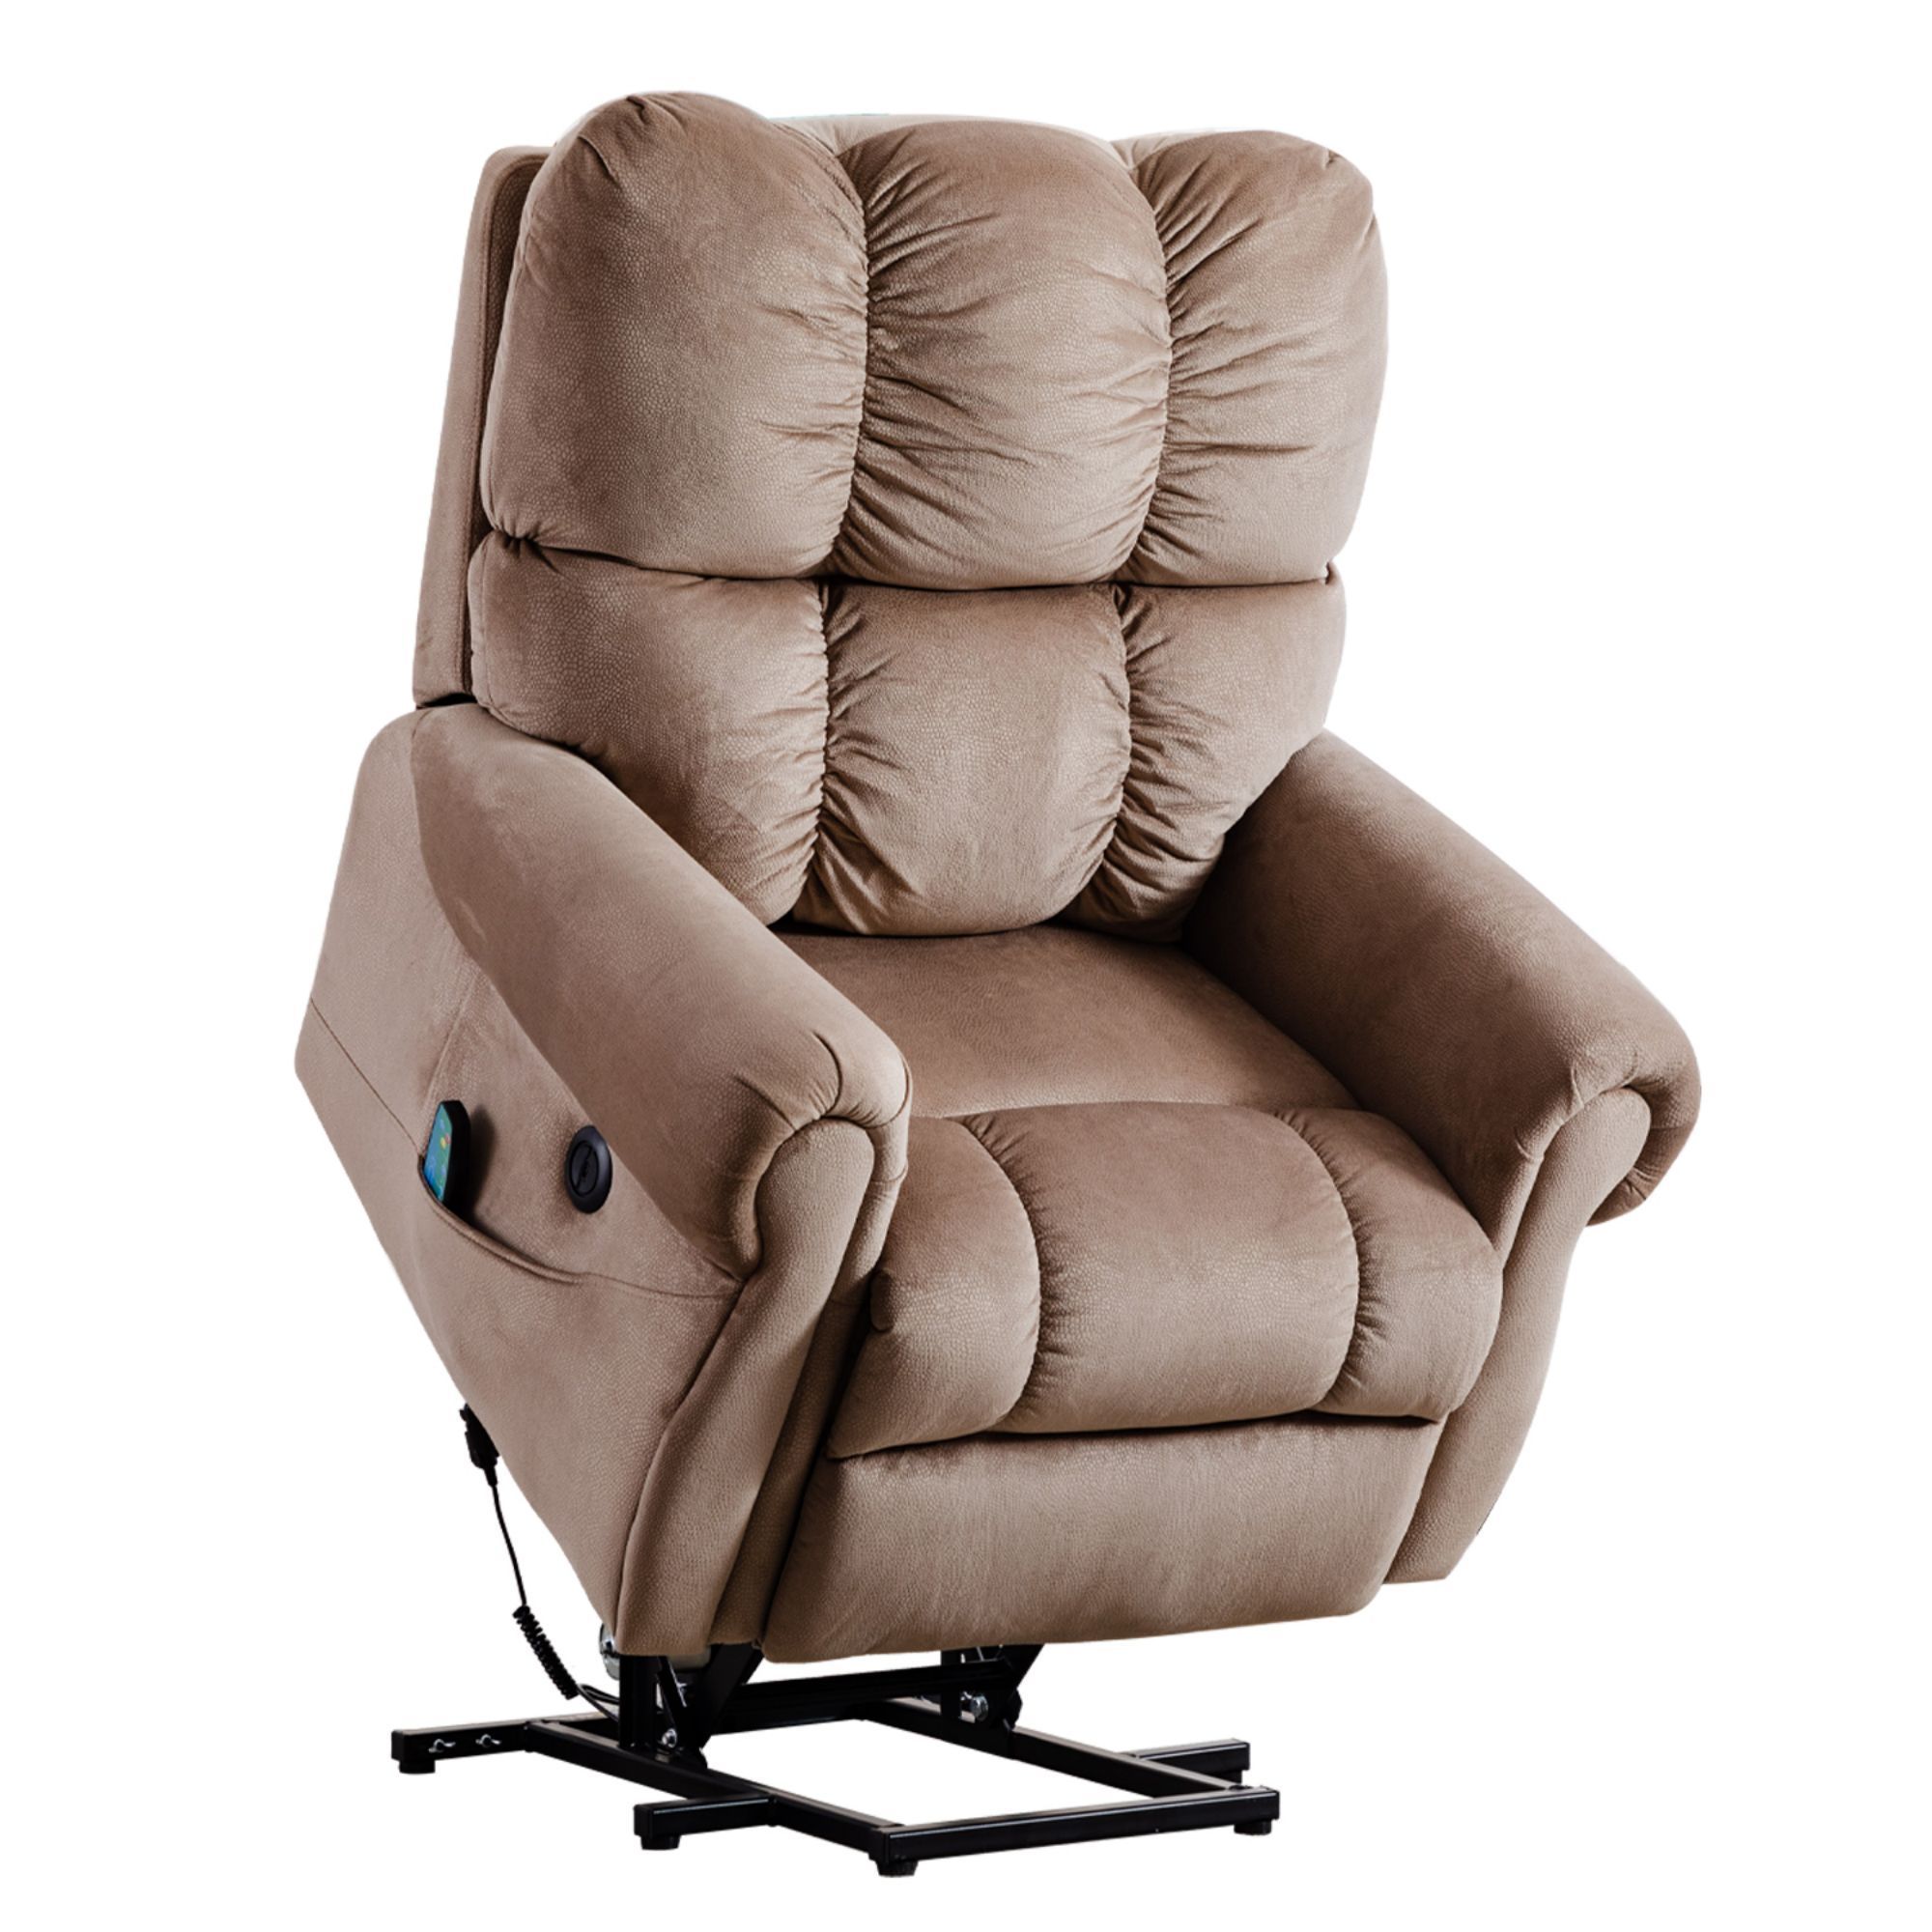 Electric lift recliner with heat therapy and massage, suitable for the elderly, heavy recliner, with modern padded arms and back, light brown-CASAINC